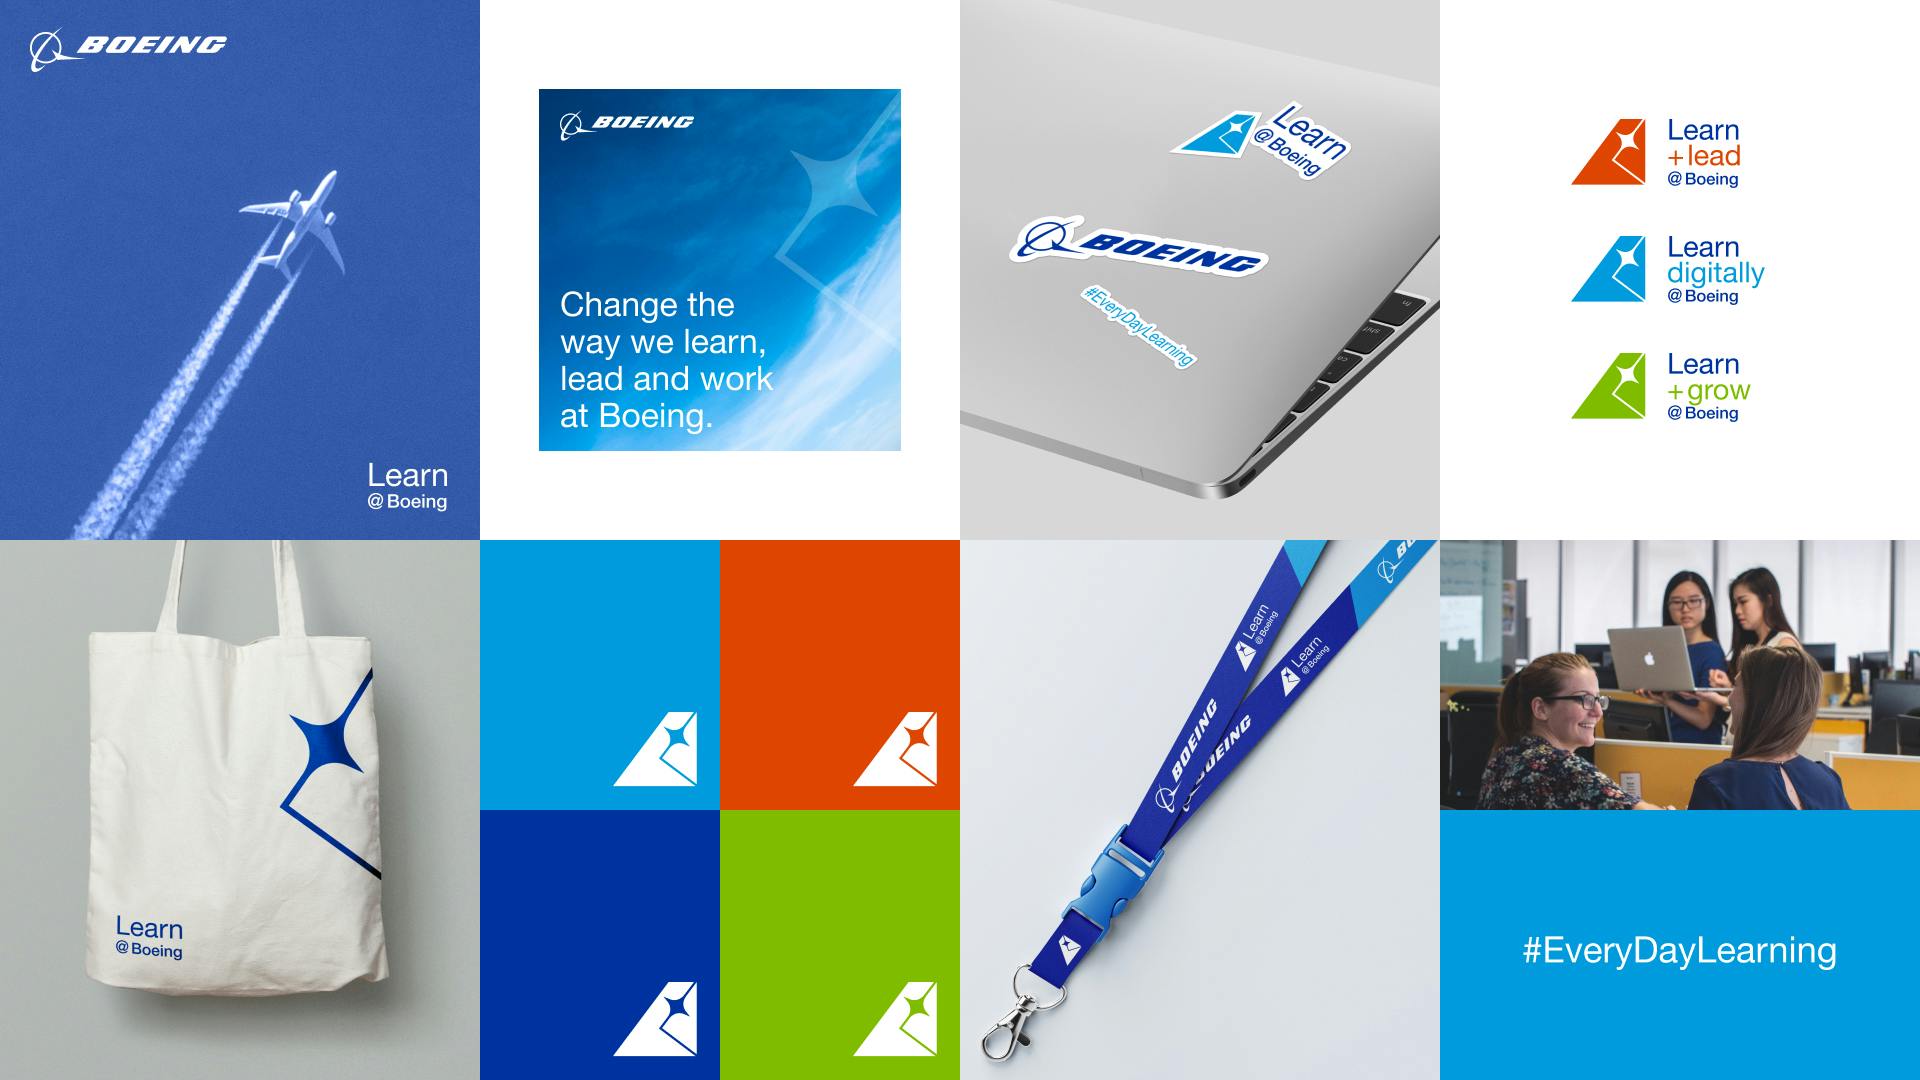 Mood board showing Learn@Boeing logo on various products such as brochures, stickers, bags and lanyards